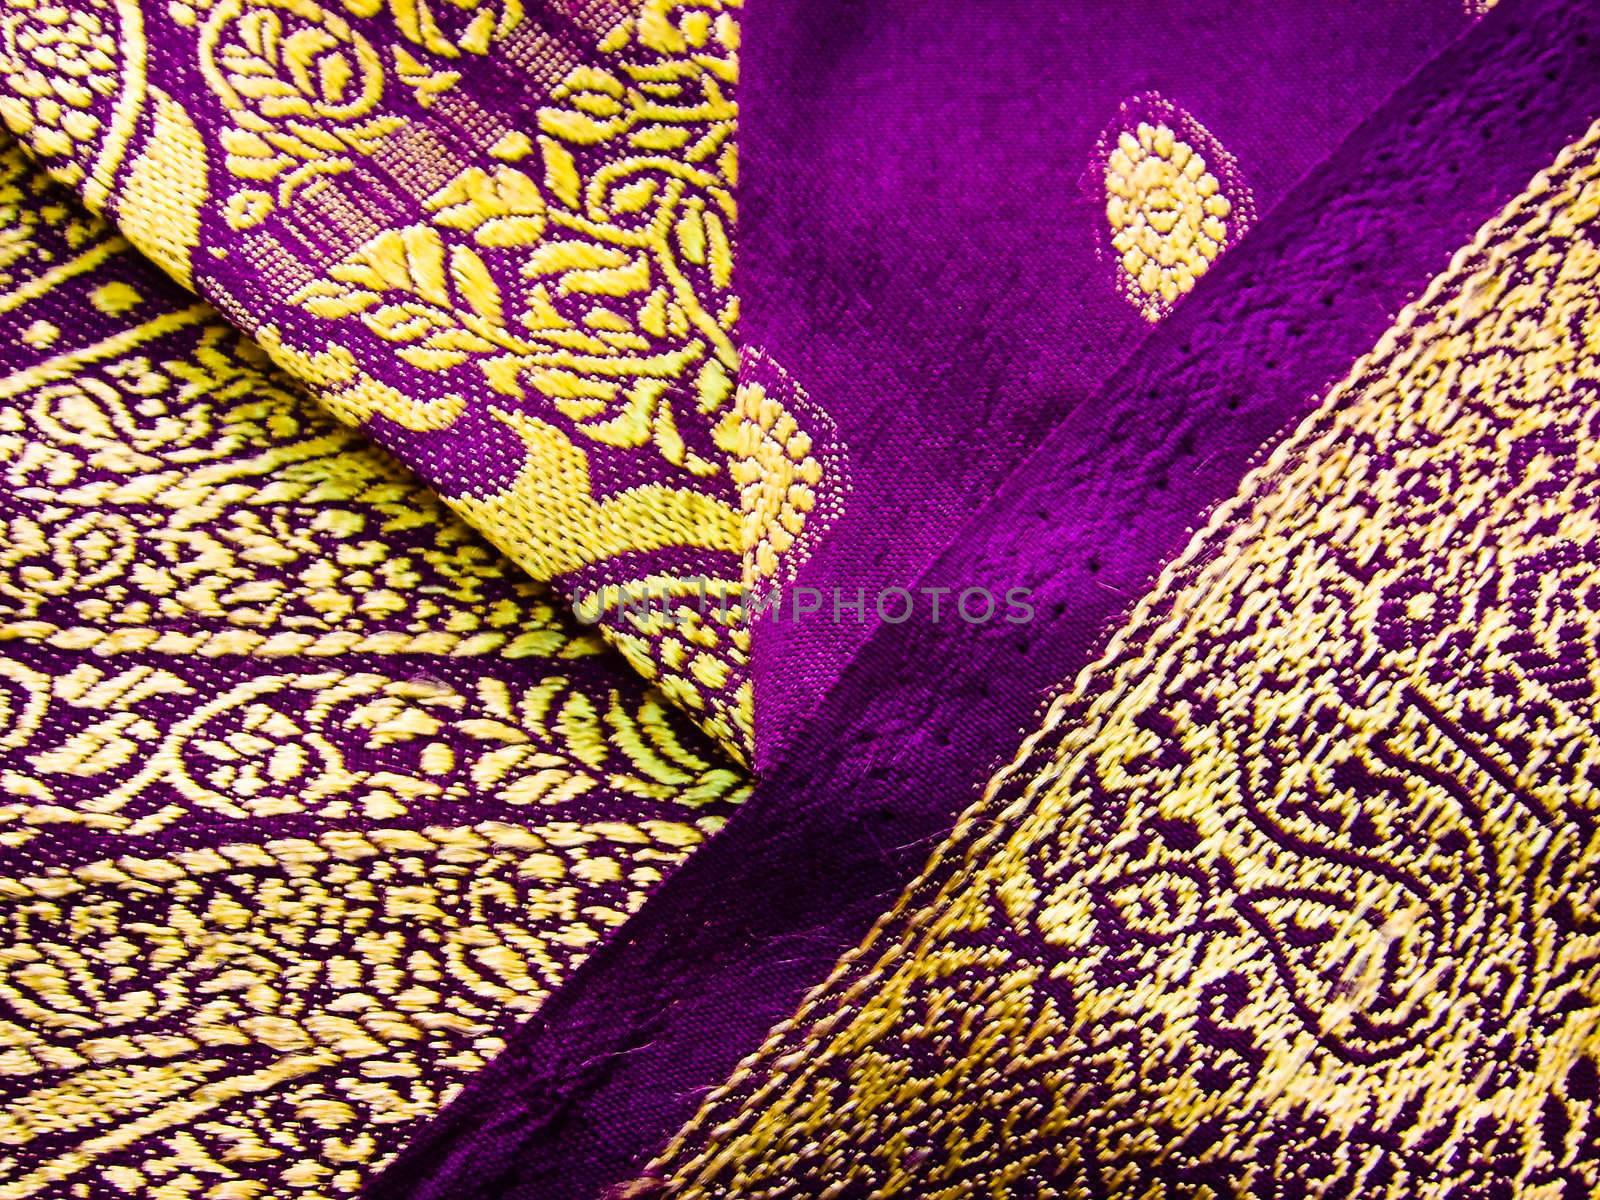 Yellow and purple saree by alvingb